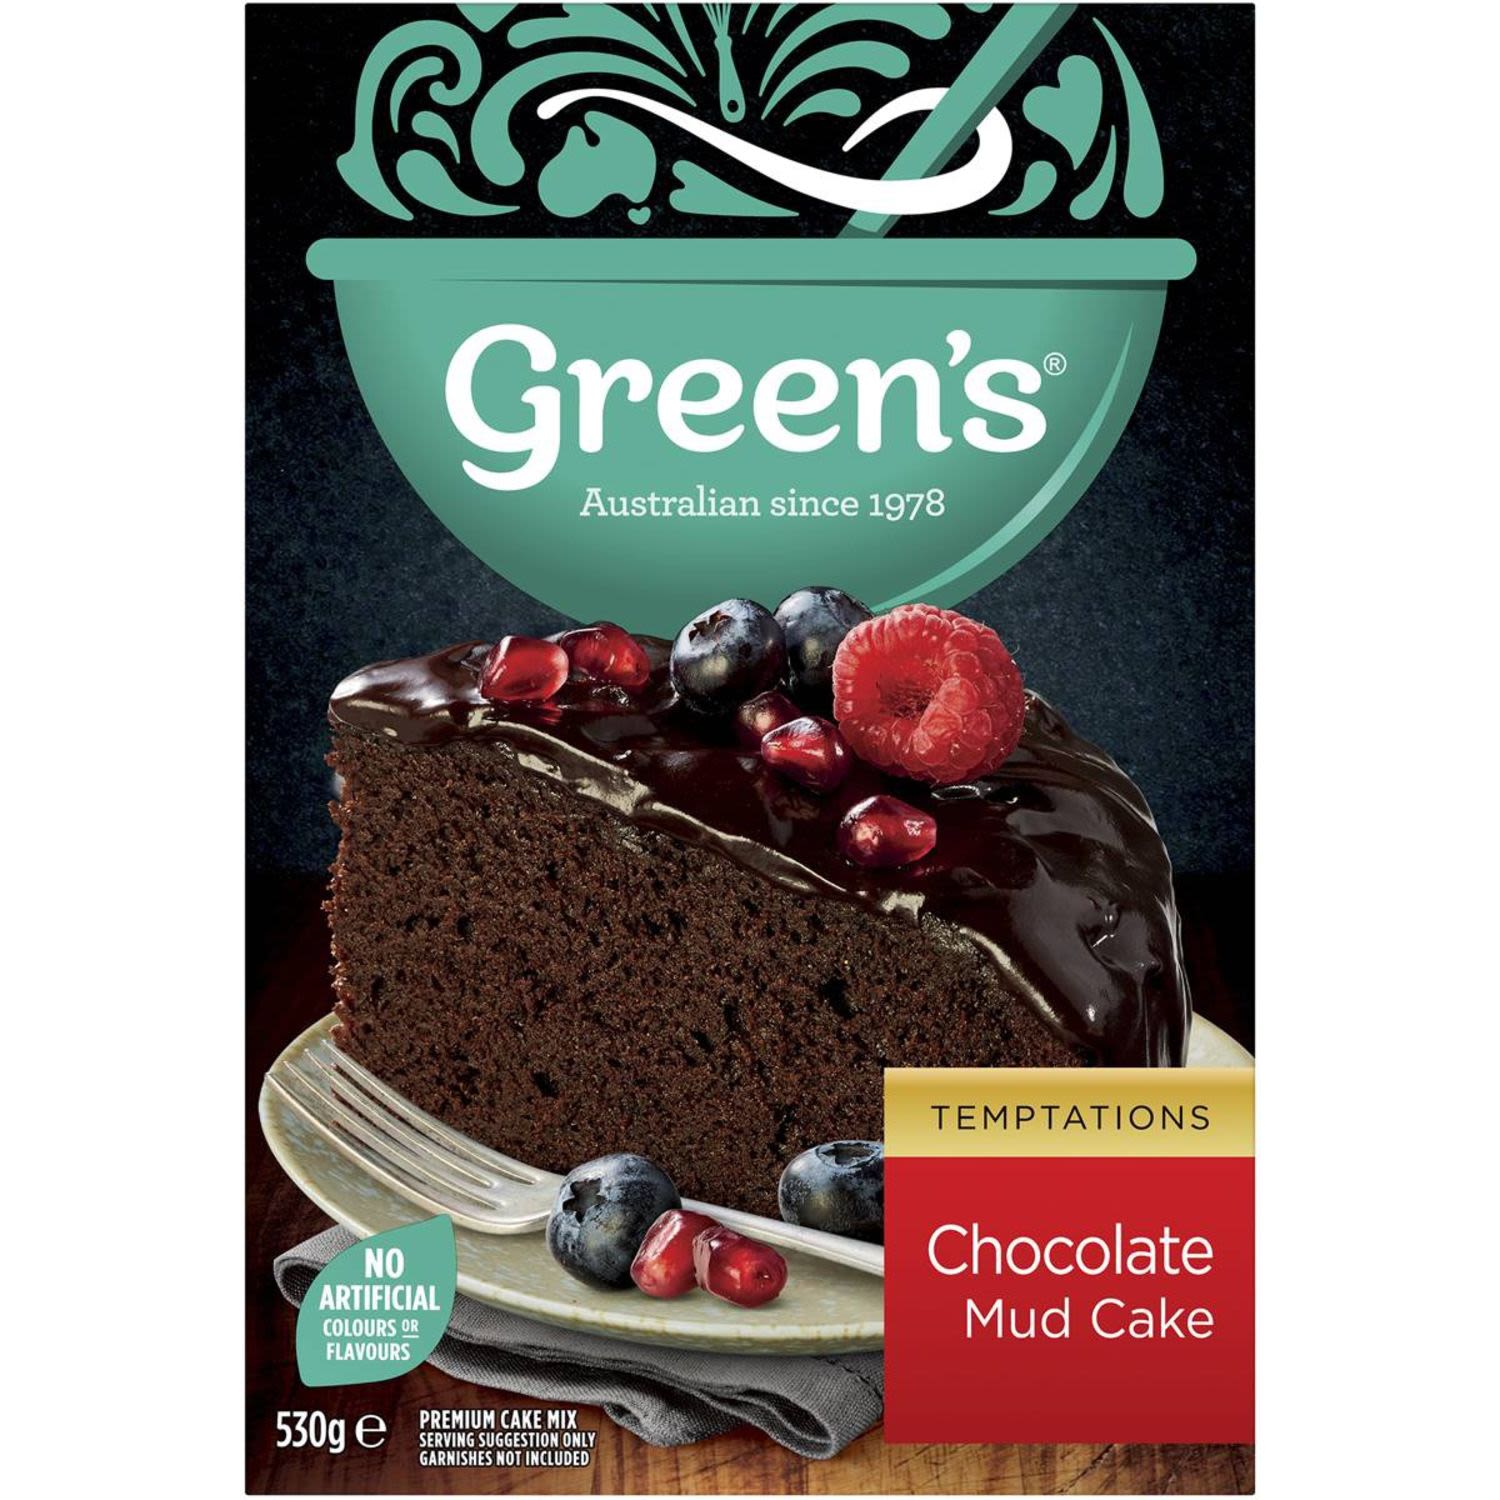 Greens makes it easy to bake the perfect cake every time. Perfectly moist with plenty of chocolate flavour. Available in a 530g pack. The Greens Chocolate Mud Cake is vegan suitable, simply substitute the eggs: per egg, mix 2 tablespoons of ground flaxseeds with 60mL water and allow to stand for 10 minutes. And for the butter, simply replace with a non-dairy spread. Proudly Australian owned. Greens are the Makers of Bakers.<br /> <br />